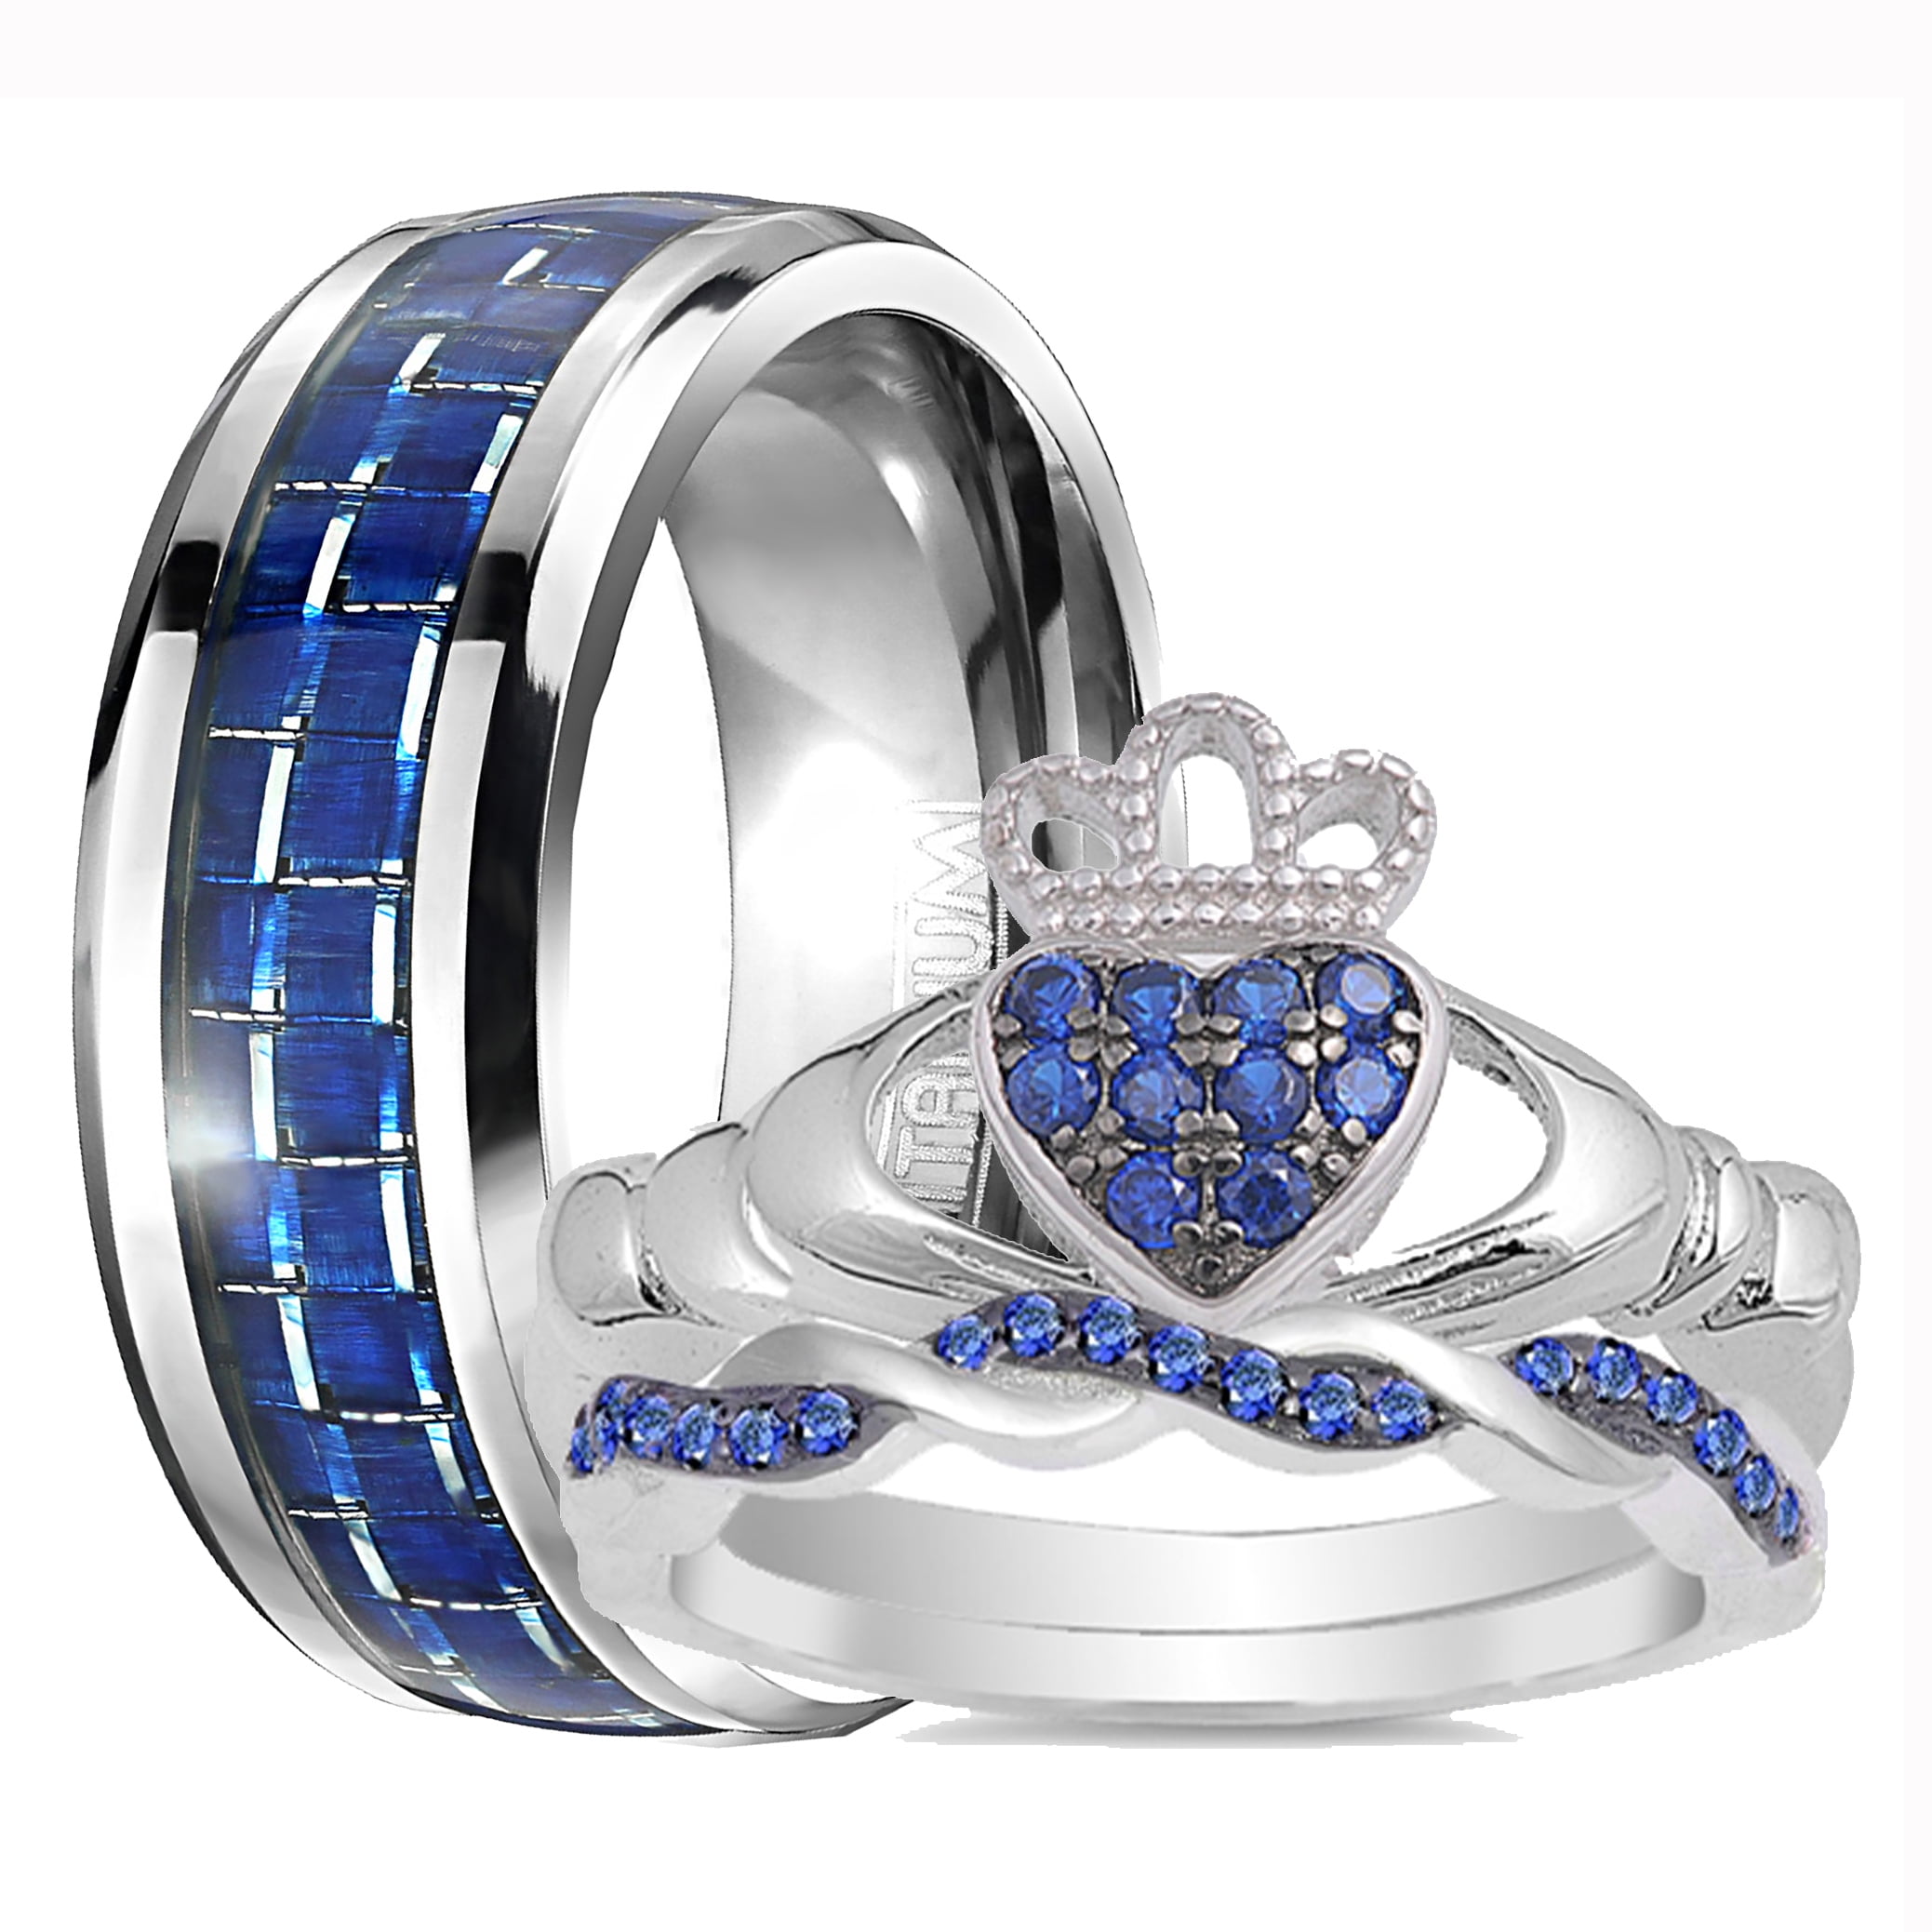 His Titanium Black and Her Sterling Silver Cz Blue engagement wedding ring set 